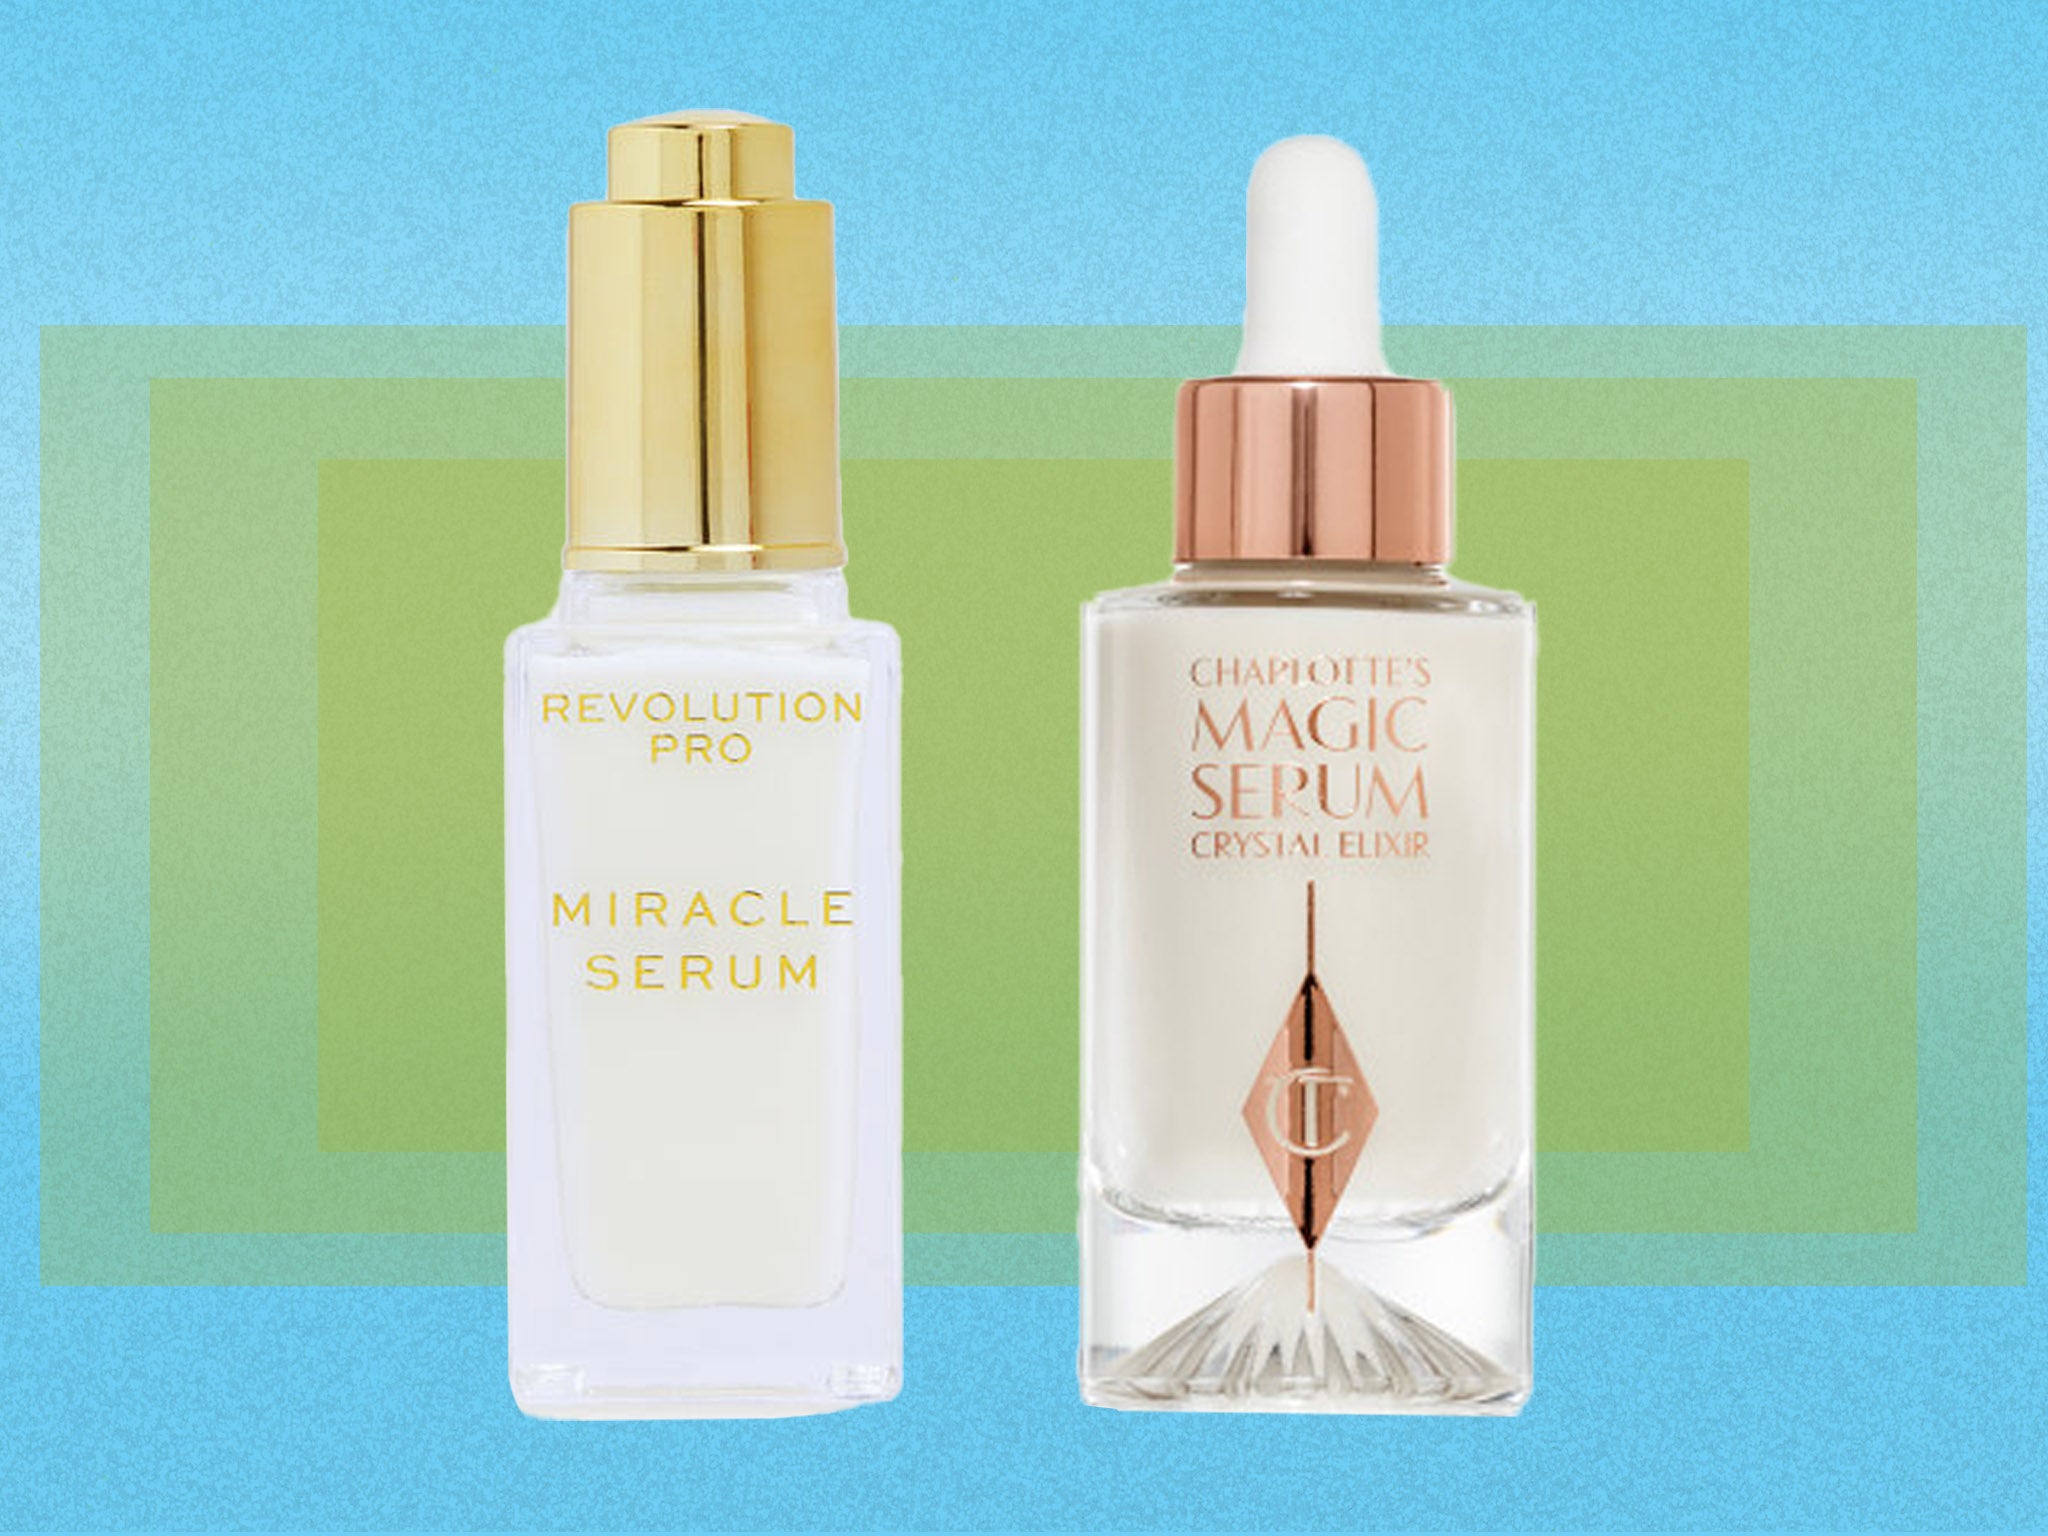 Revolution’s new serum follows the sell-out success of its magic cream dupe